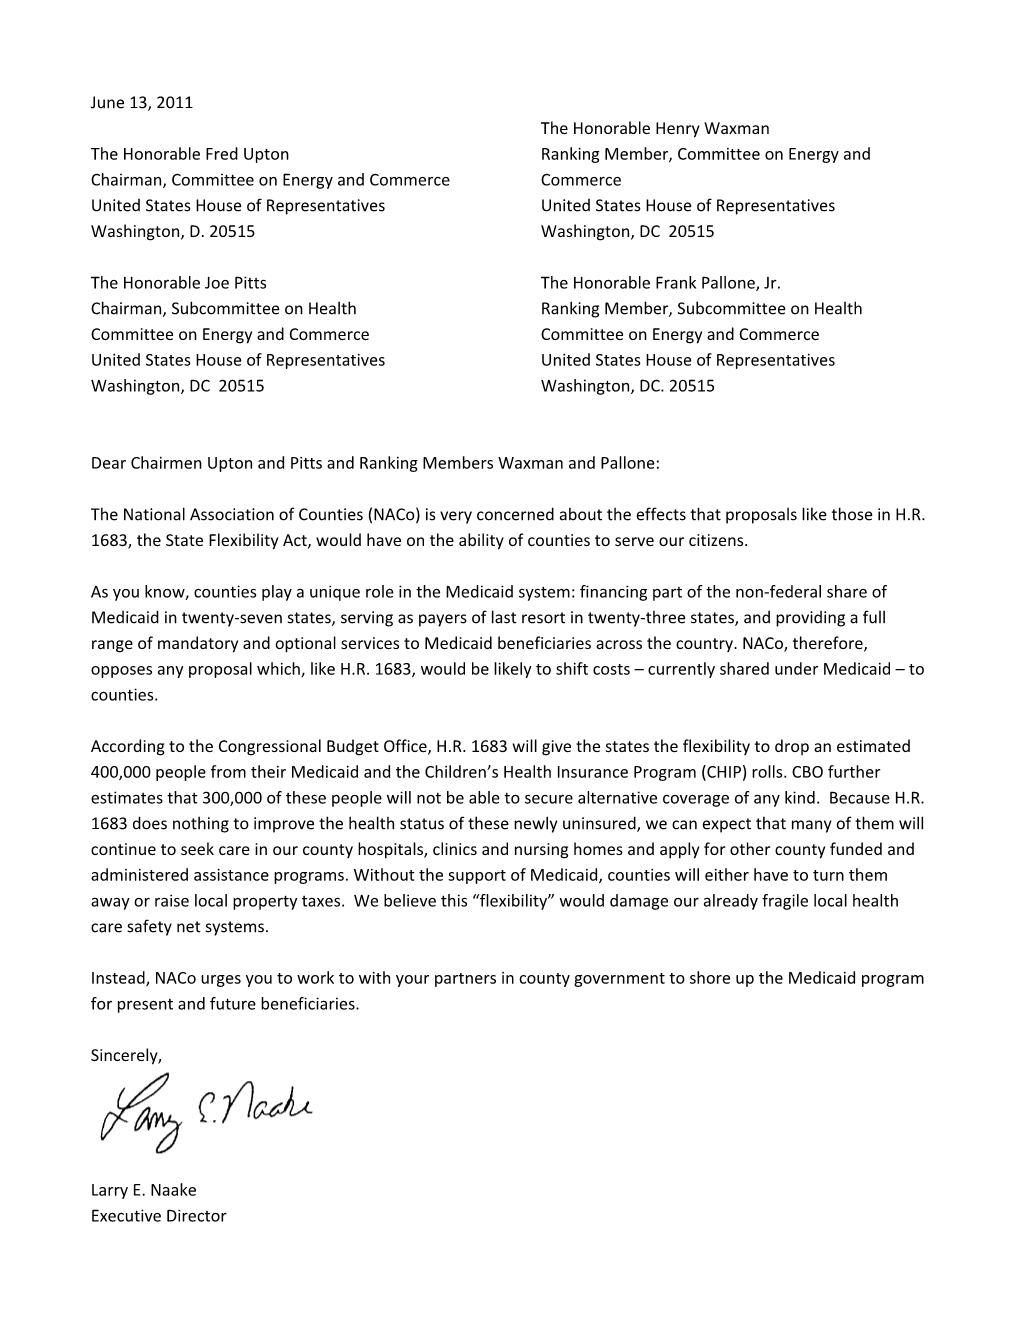 Letter to House Energy & Commerce Against H.R. 1683 & Cost-Shifting to Counties